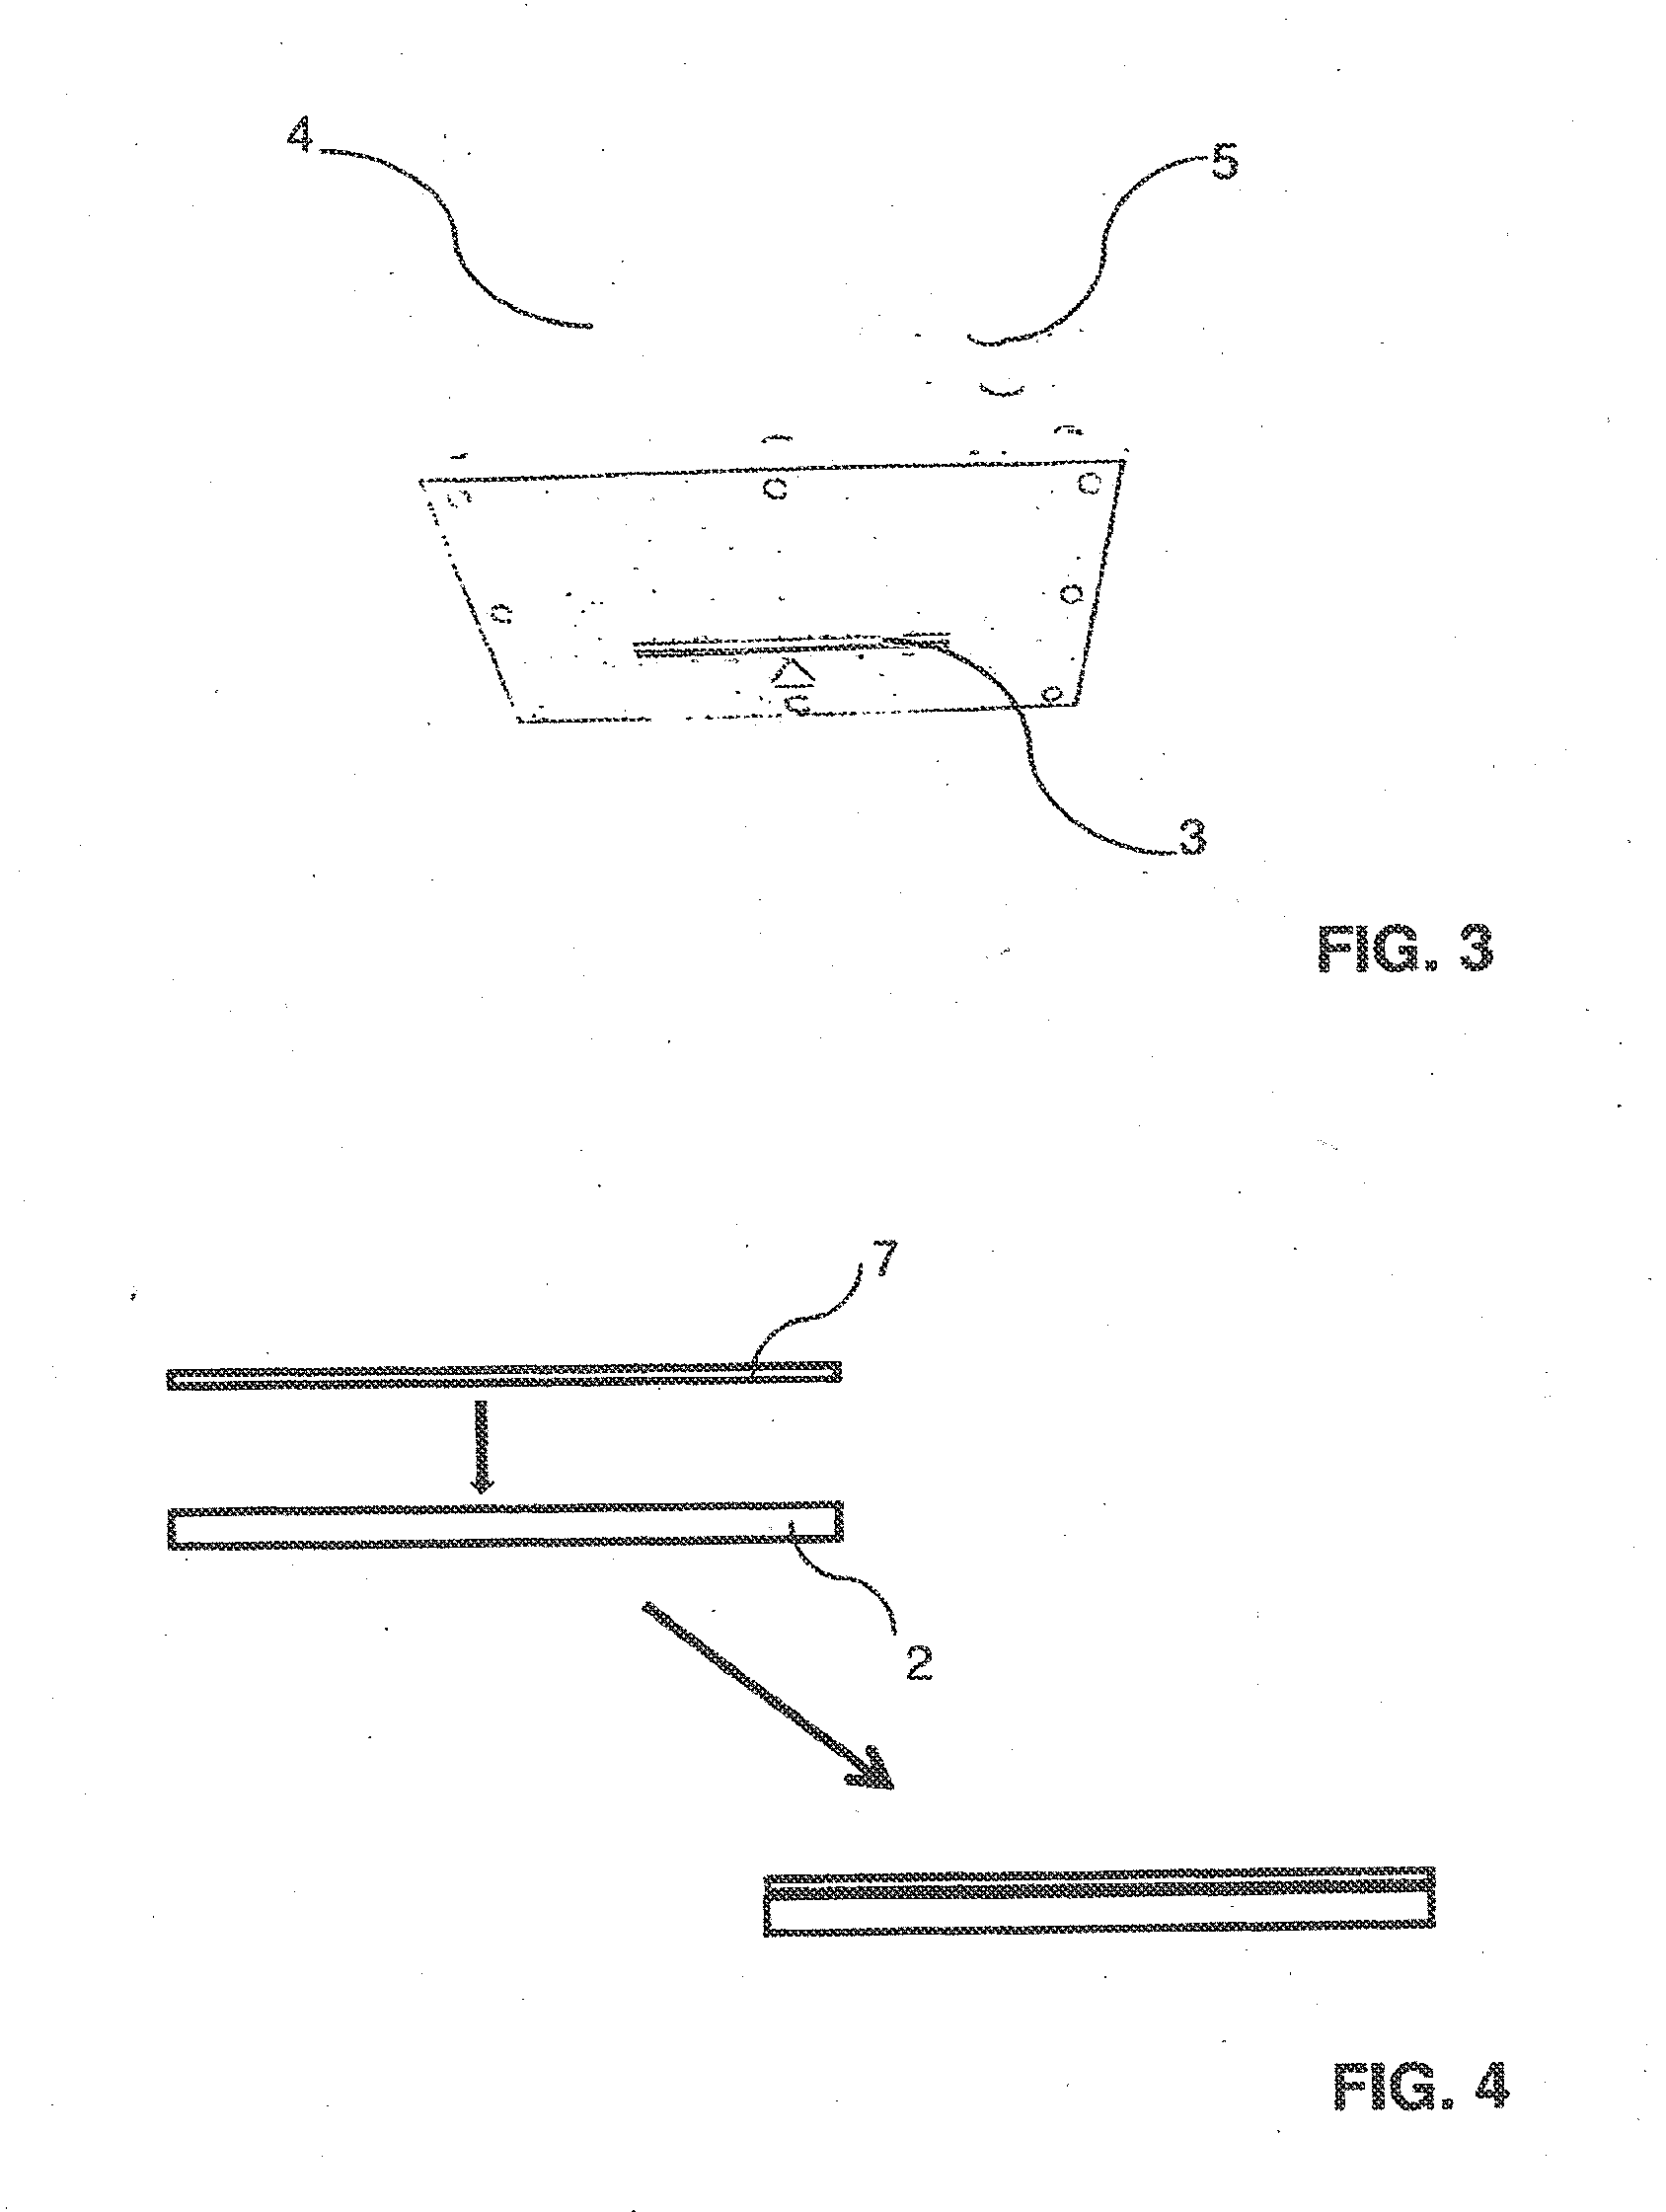 Lamination apparatus and method for sheet materials having temperature-sensitive elements, and documents produced thereby